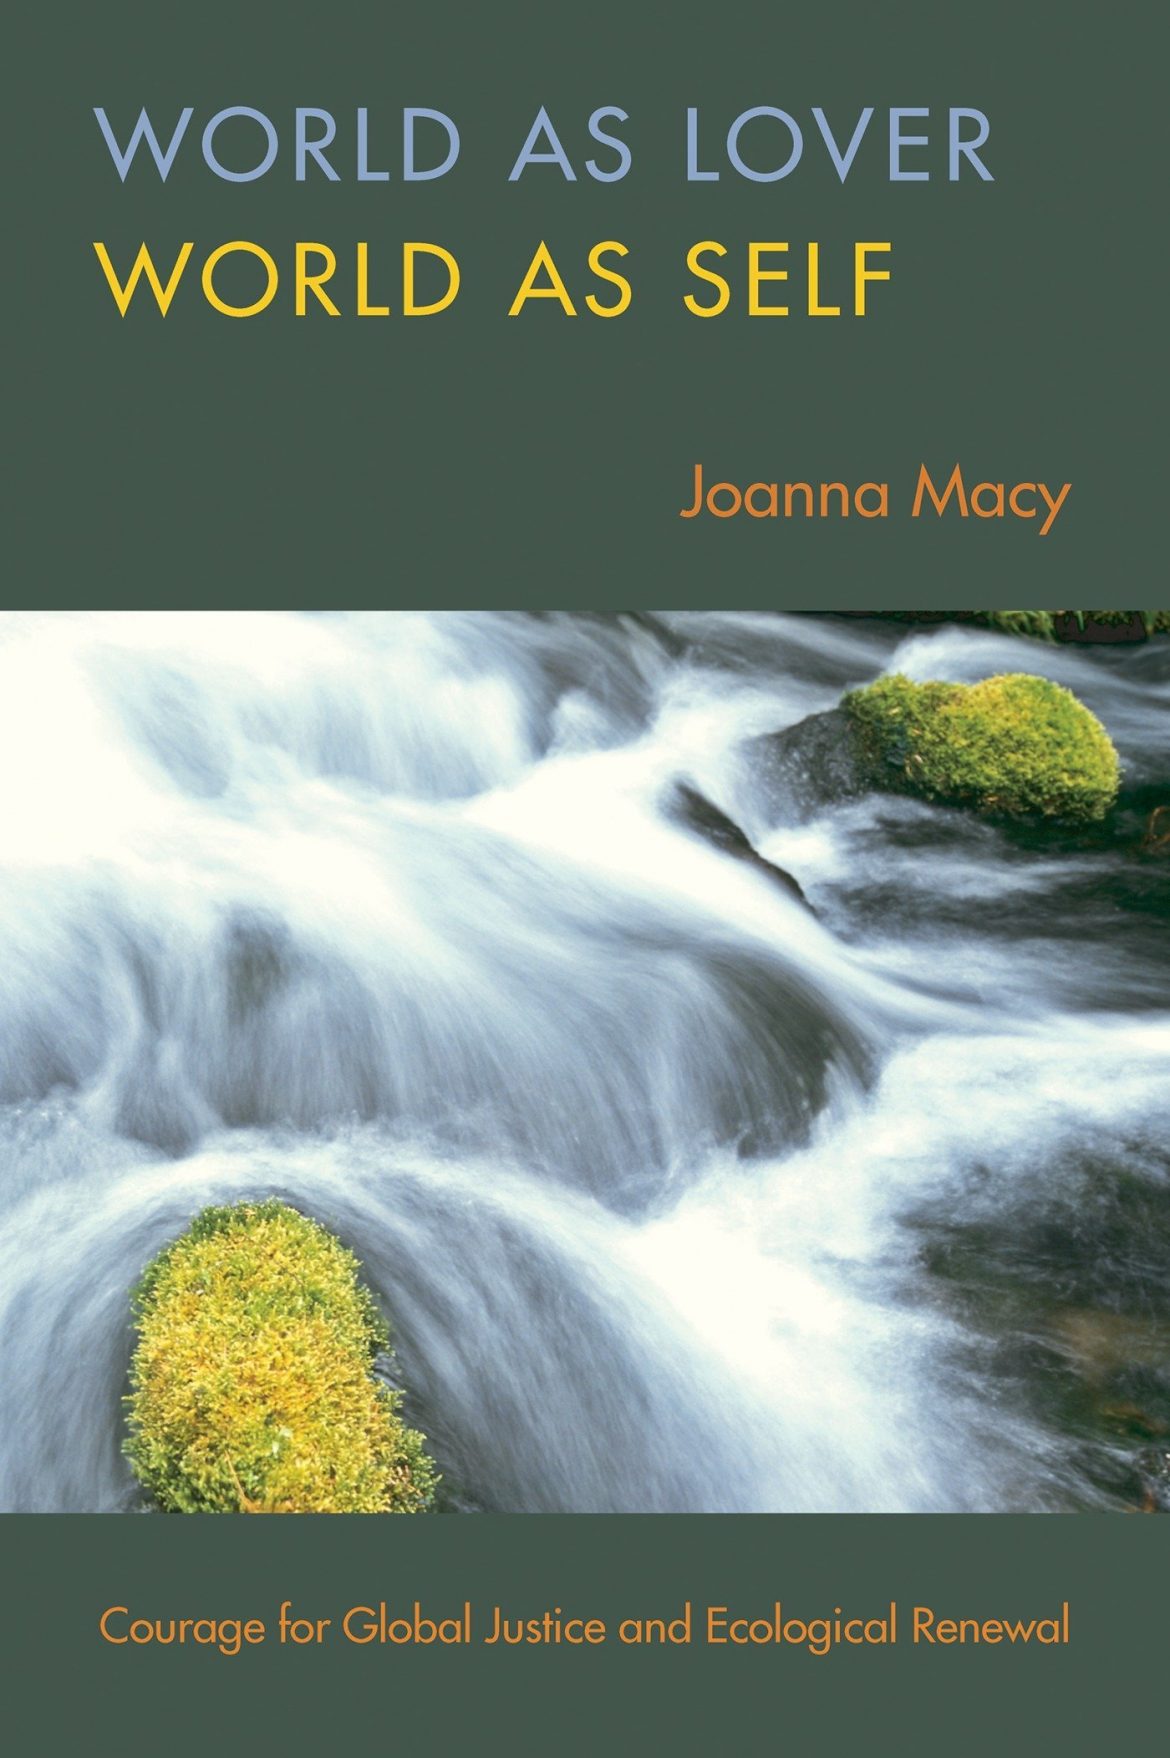 Book: “World As Lover, World as Self”, by Joanna Macy